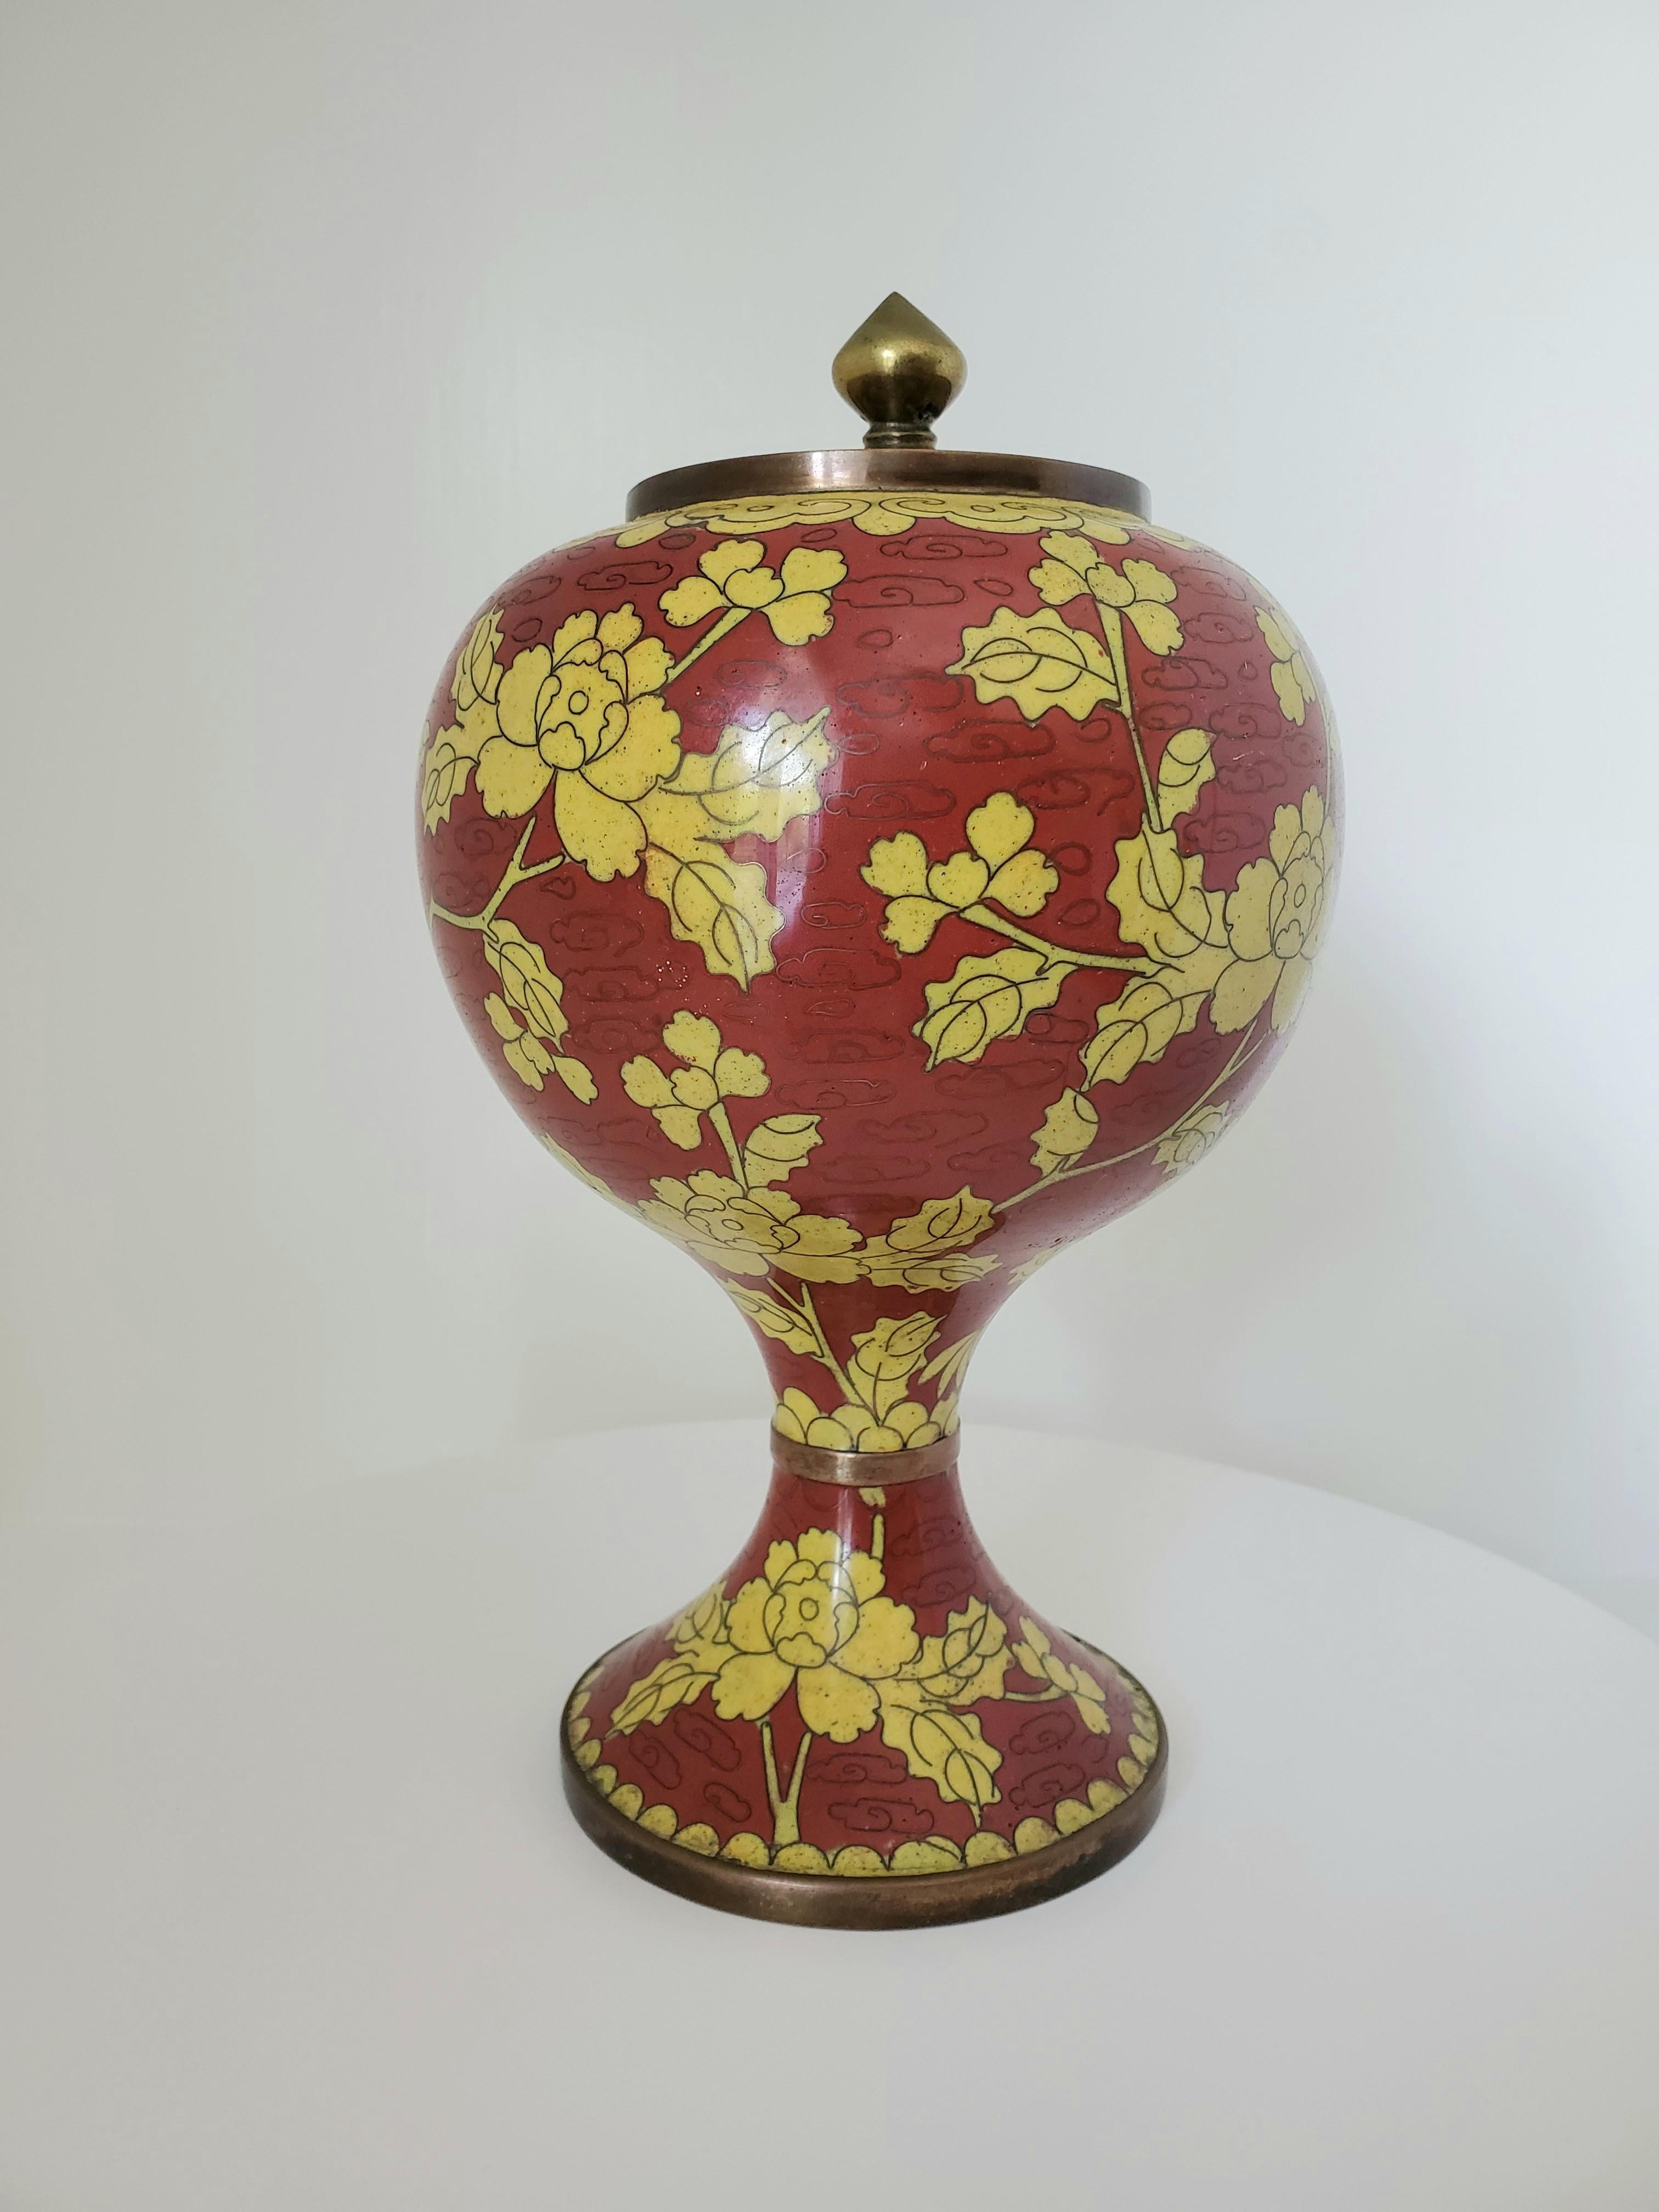 This lovely and unique Qing Dynasty Cloisonné urn with lid is approximately 125 years old and is shiliuzun or pomegranate shaped with a flared stem base. The pattern consists of a mustard coloured floral motif on a red field with stylized clouds or